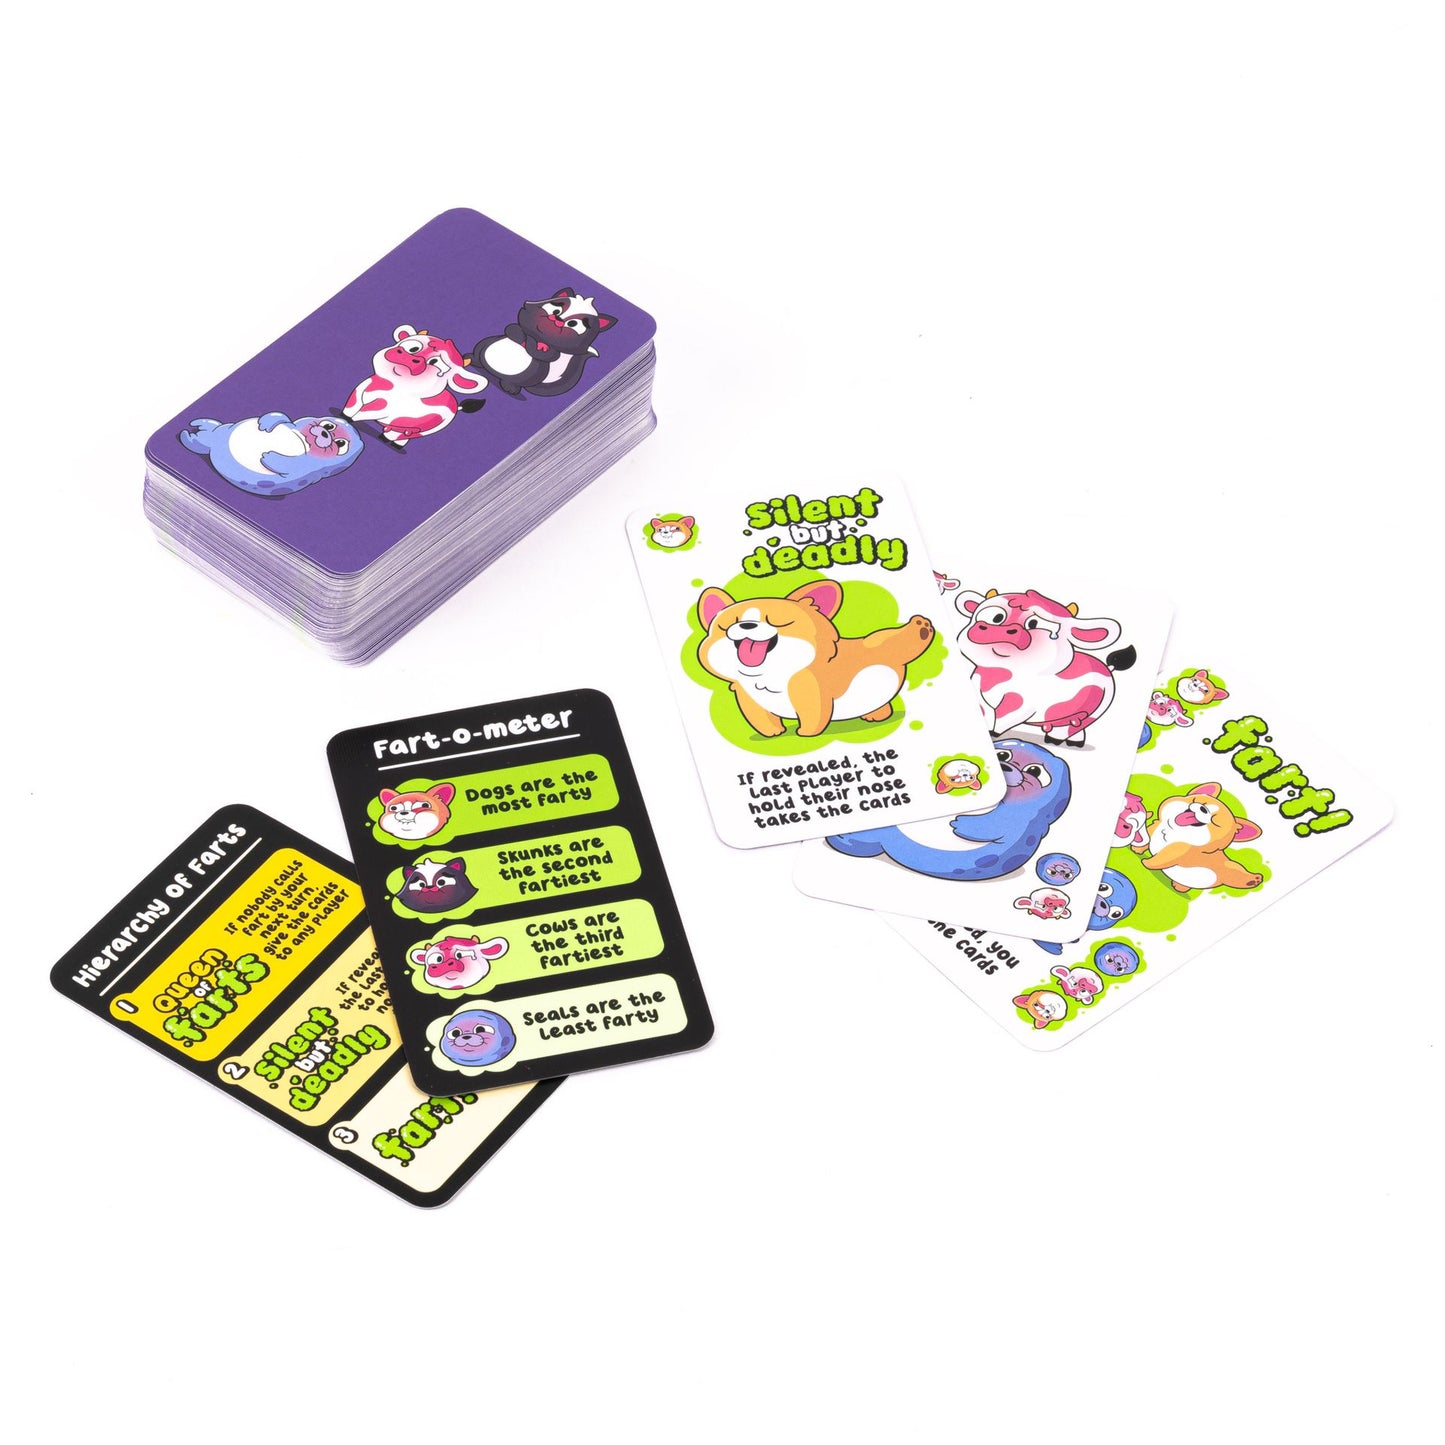 Card game Professor Puzzle - Queen of Farts